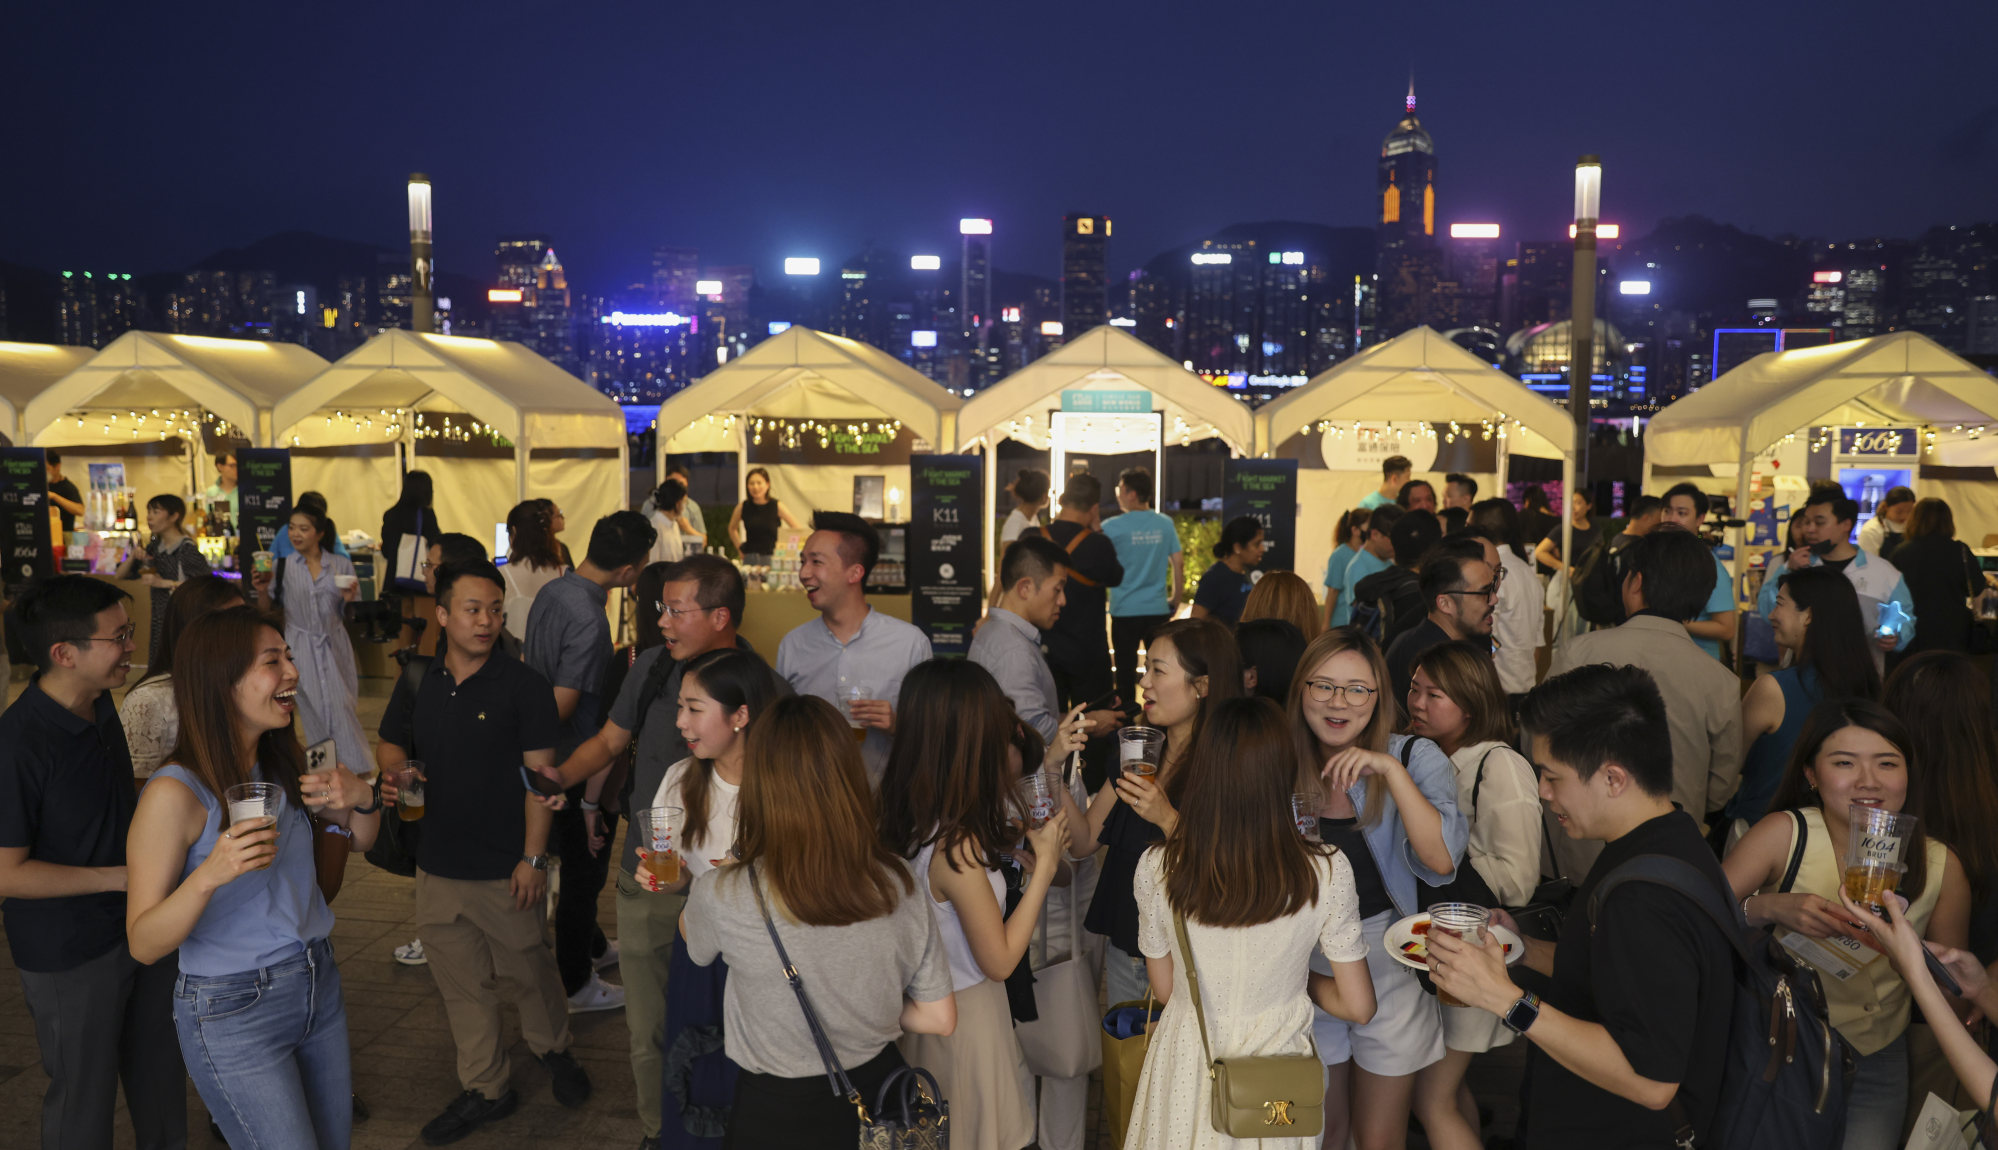 The Night Market by the Sea at K11 Musea in Tsim Sha Tsui, which features traditional street food and film-related memories. Photo: Yik Yeung-man